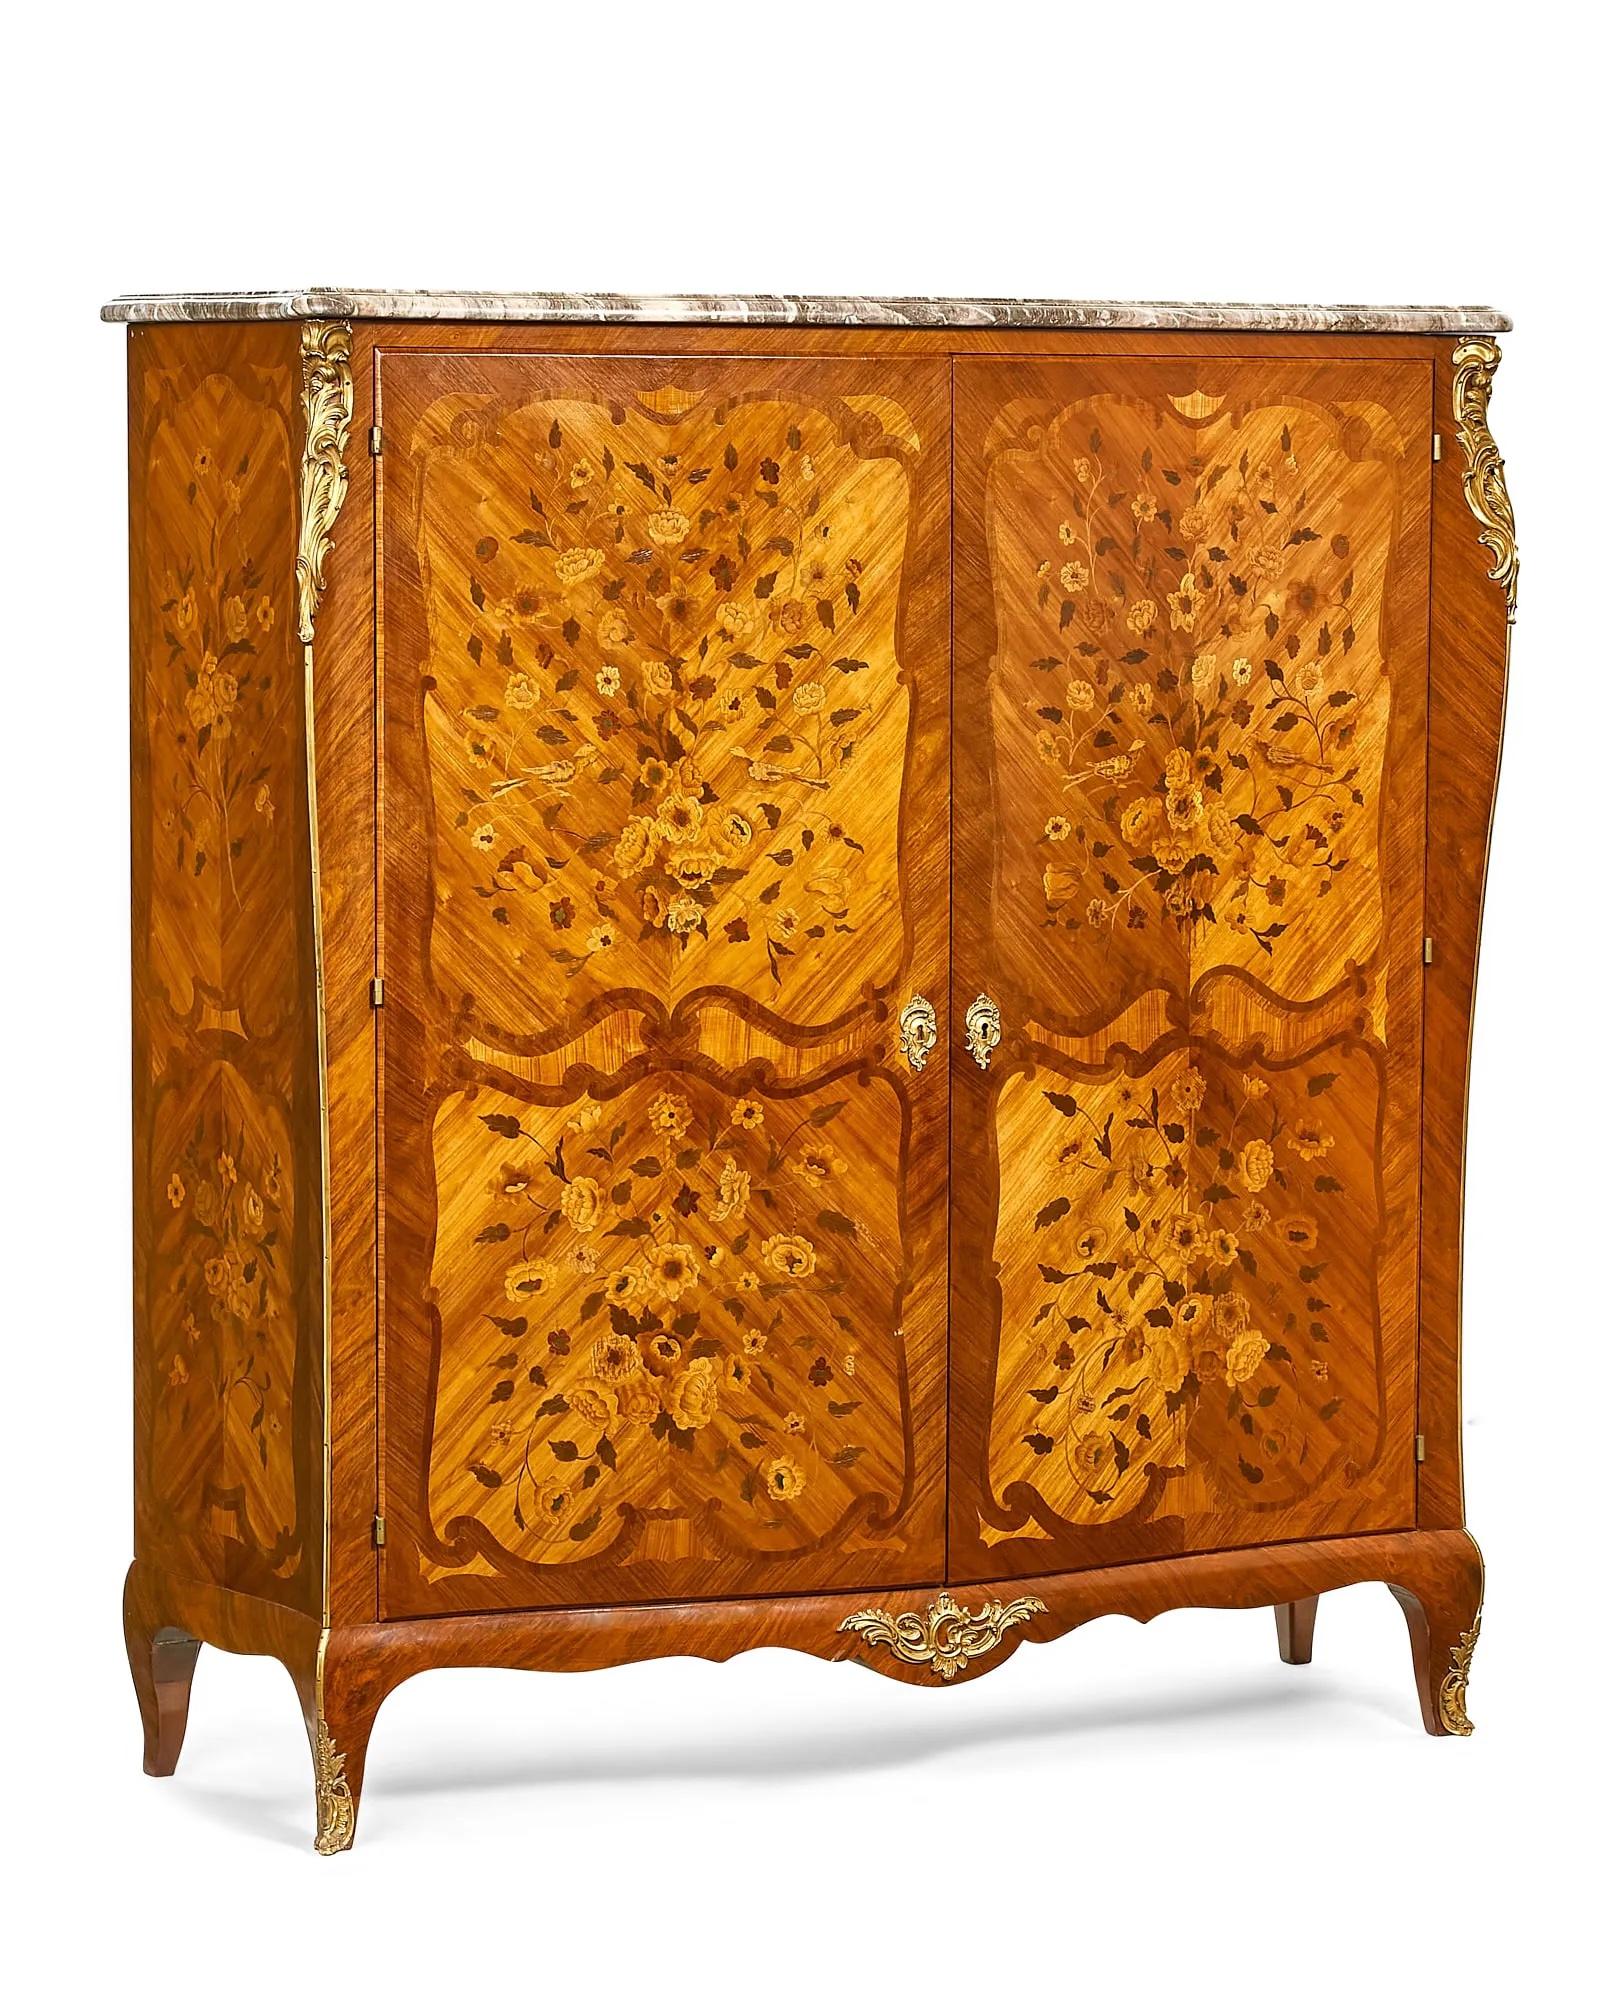 Antique  Late 19th Century French Louis XV style gilt bronze mounted kingwood, tulipwood, walnut, birch marquetry & inlay two door cabinet surmounted by a variegated marble top, the interior with three removable, adjustable shelves over a pair of